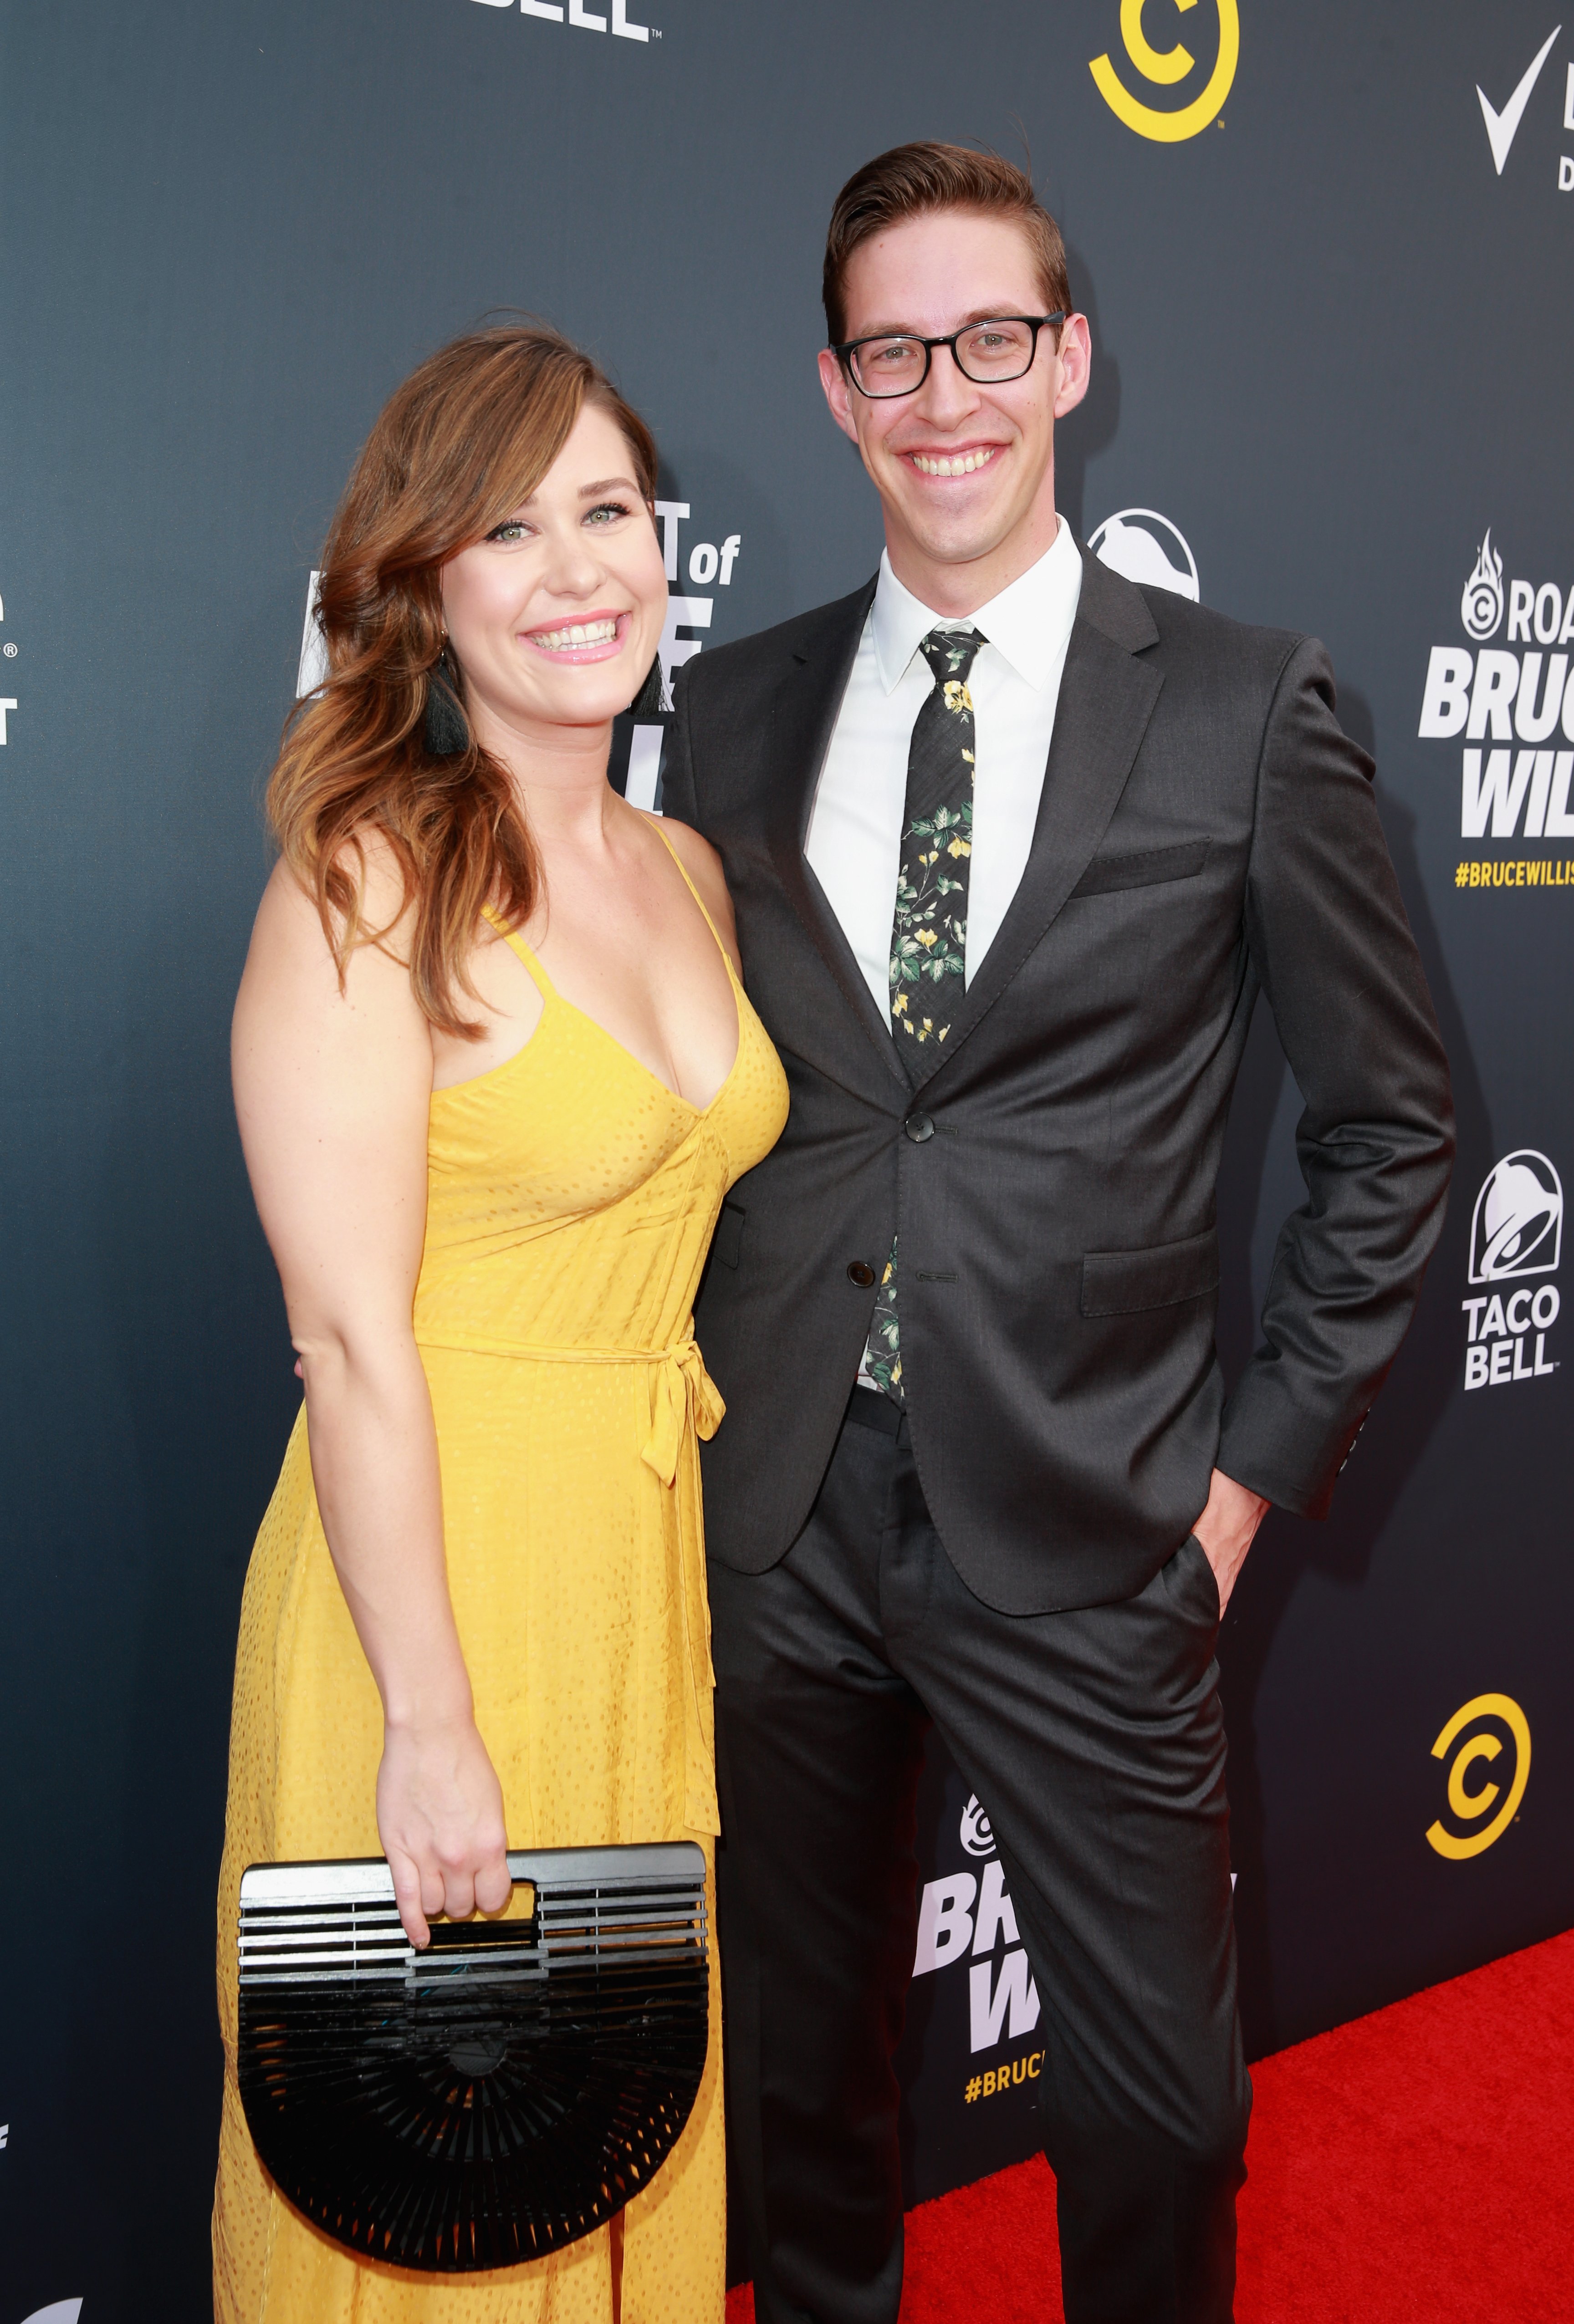 Becky Habersberger and Keith Habersberger at the Comedy Central Roast of Bruce Willis on July 14, 2018, in Los Angeles, California. | Source: Getty Images